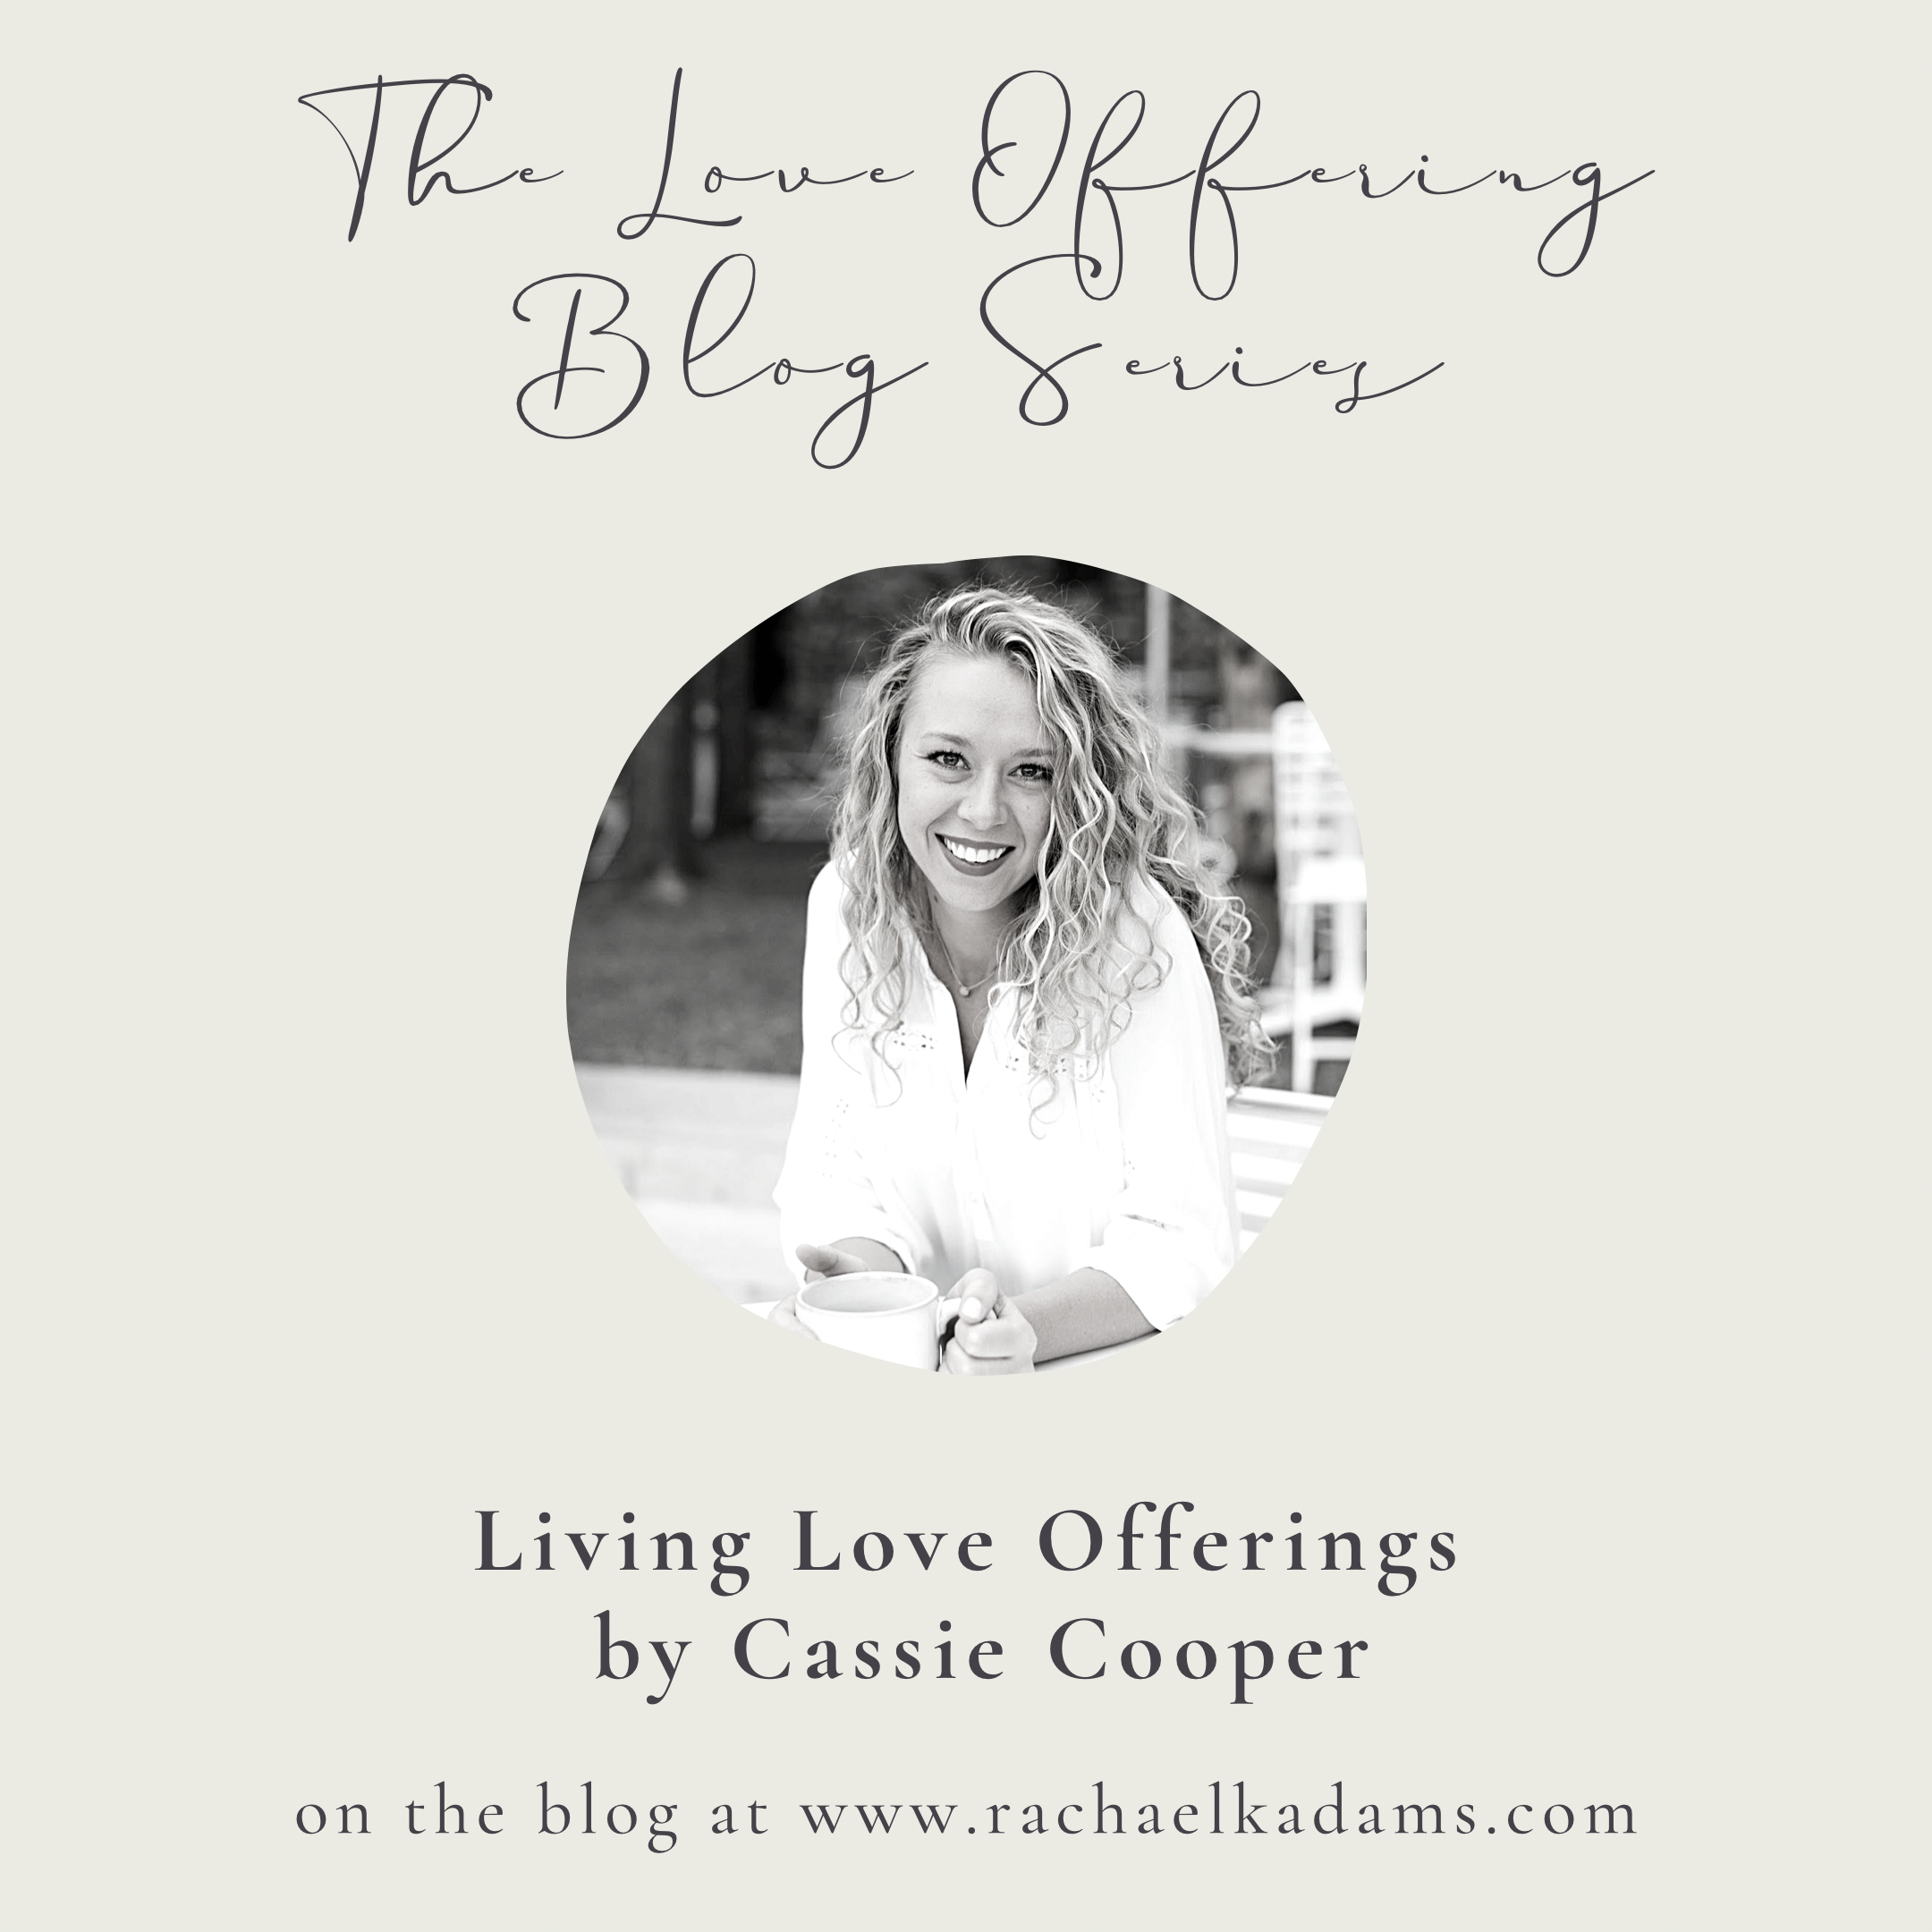 Living Love Offerings by Cassie Cooper